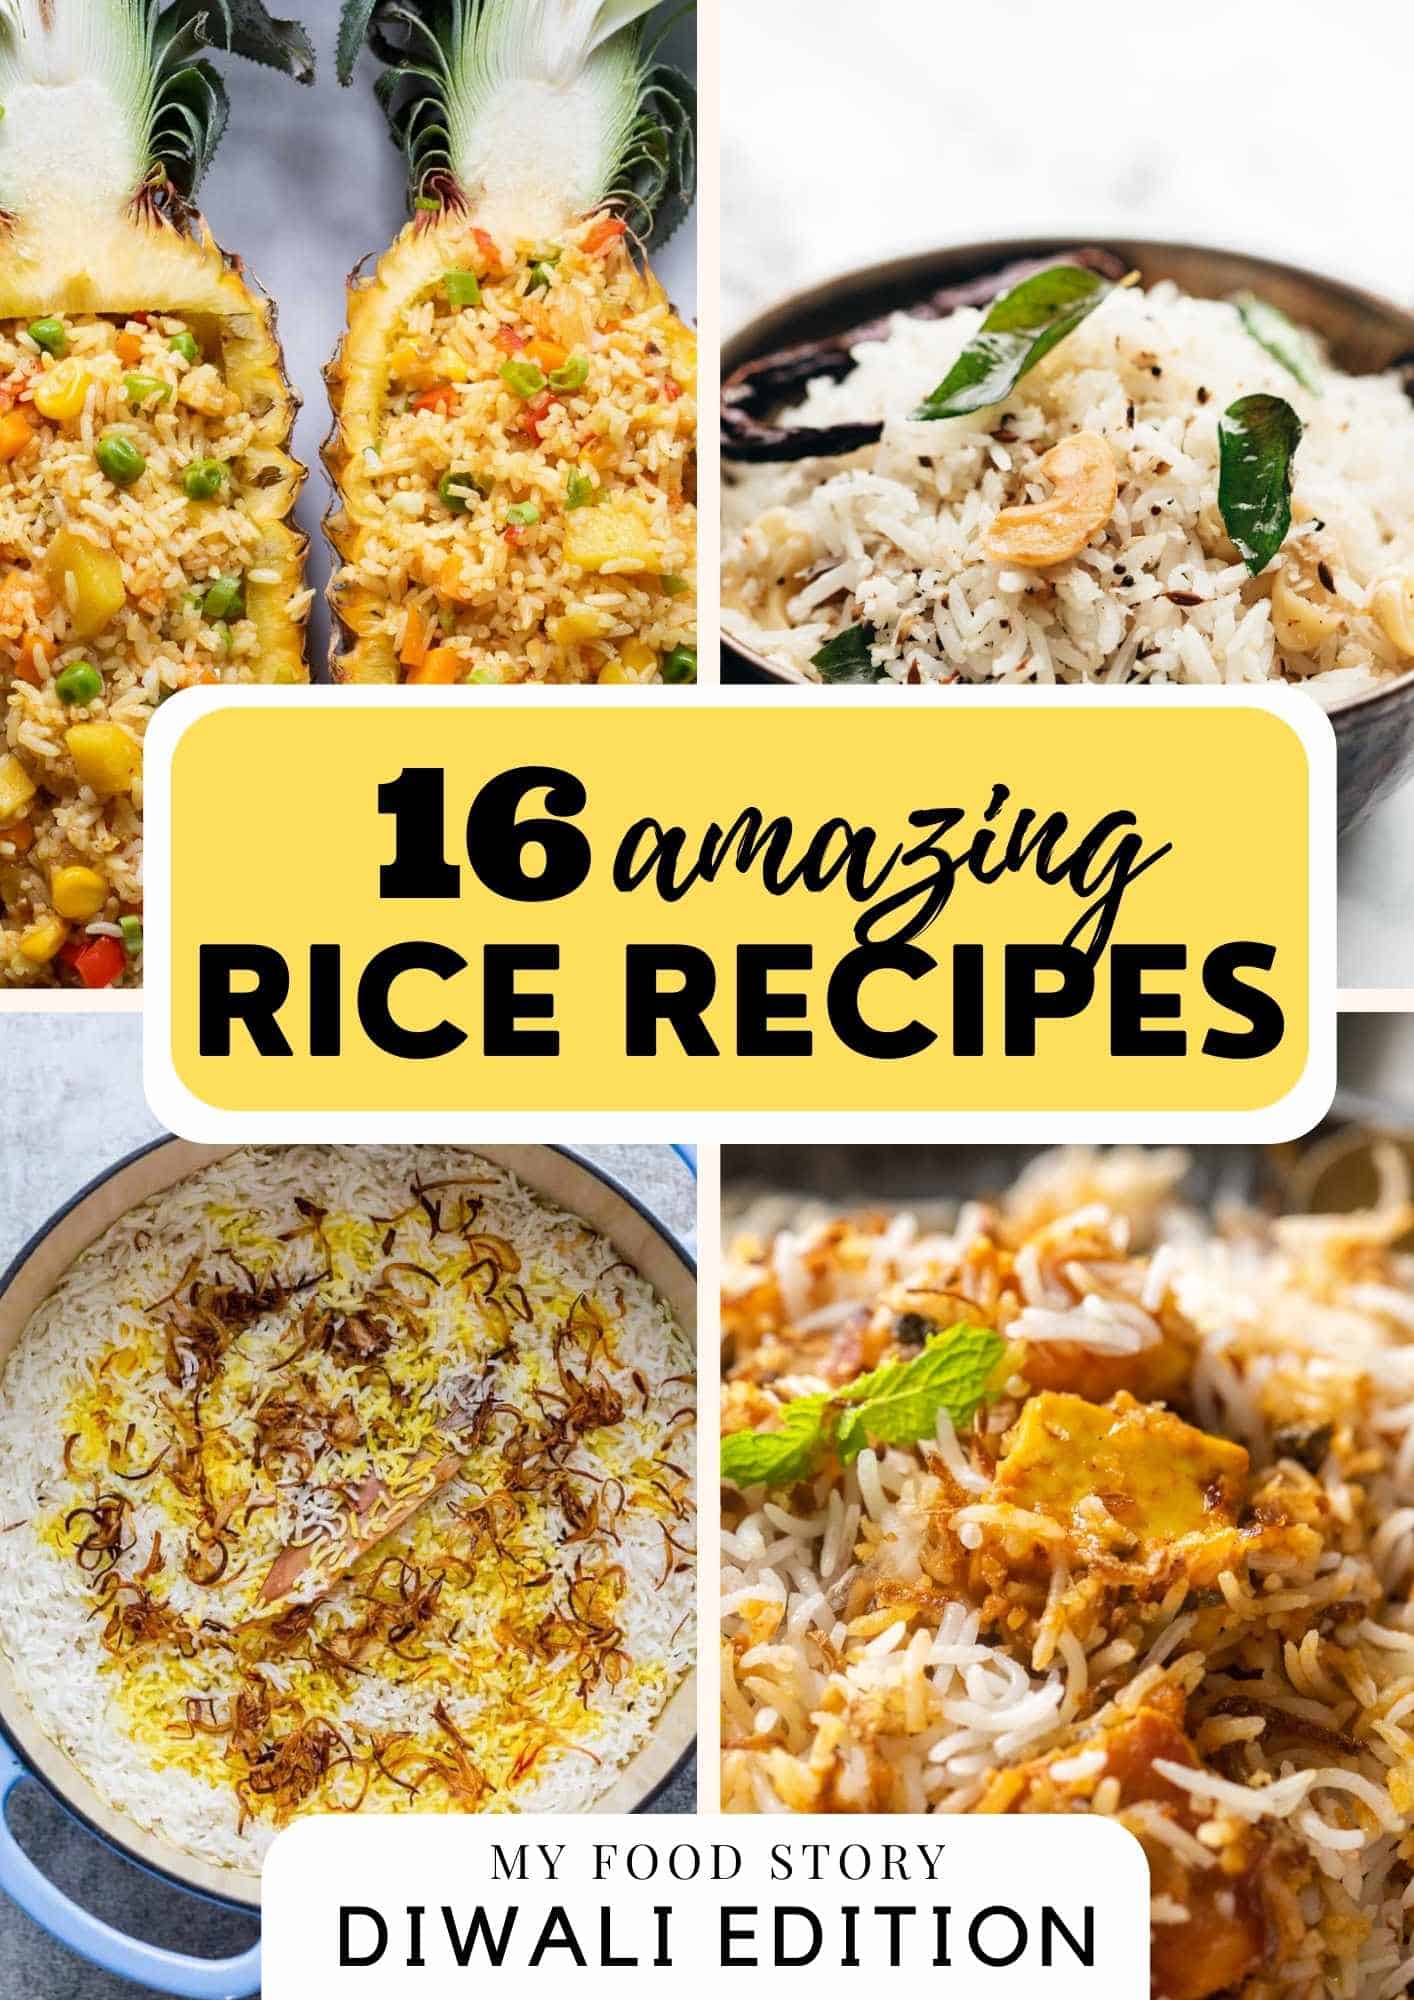 Picture collage showing four rice dishes photographs and text overlay